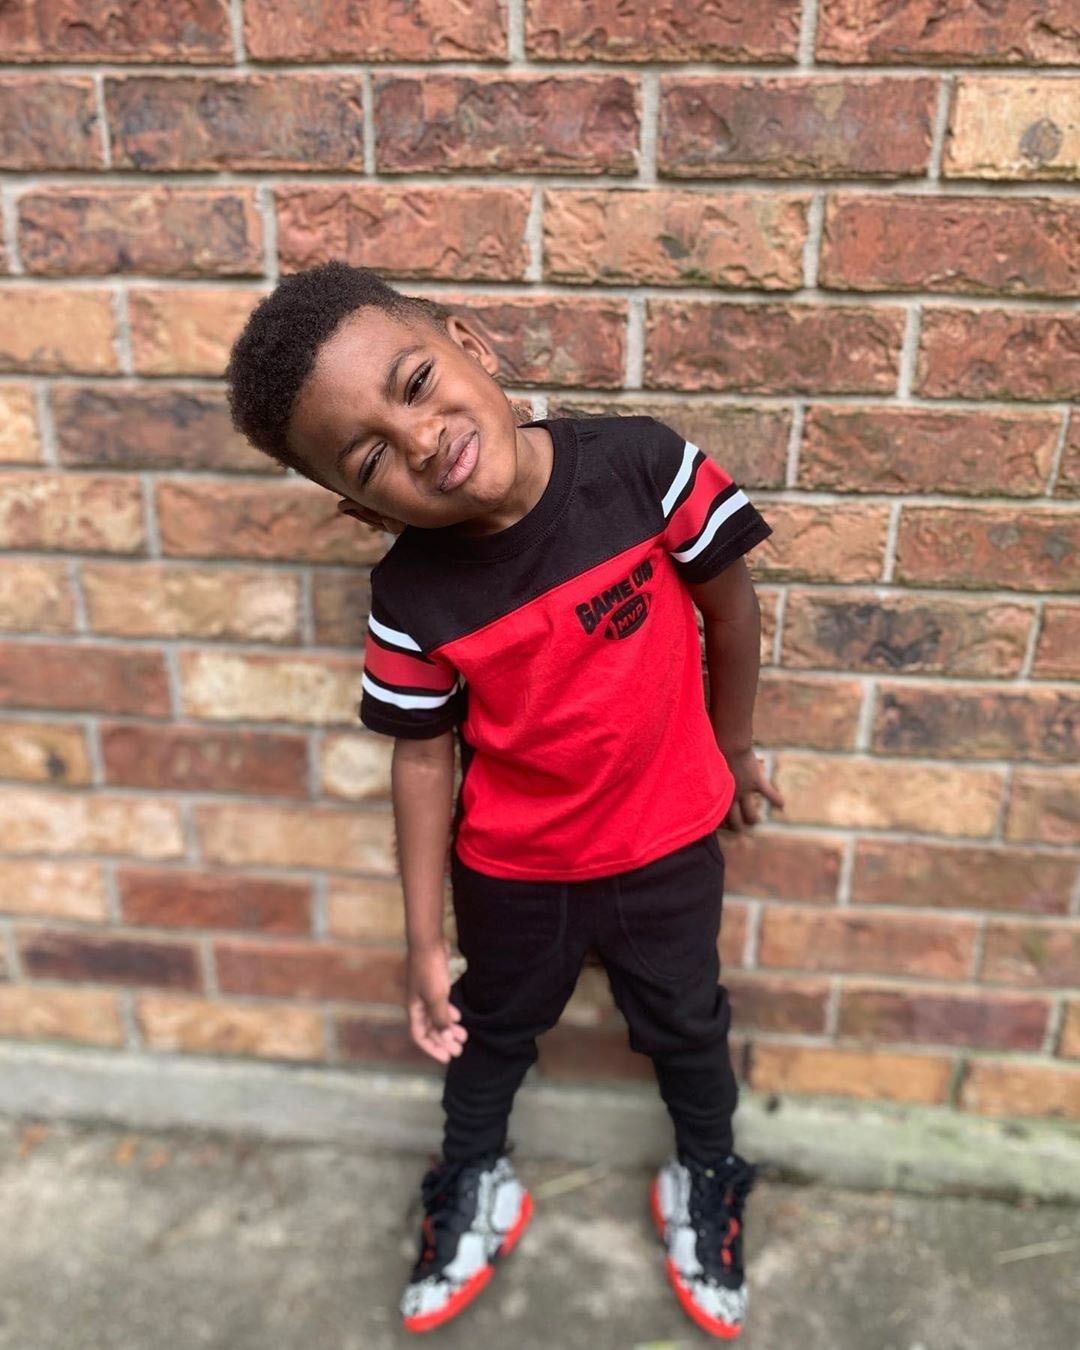 Kayden Gaulden wearing a red and black shirt while pouting